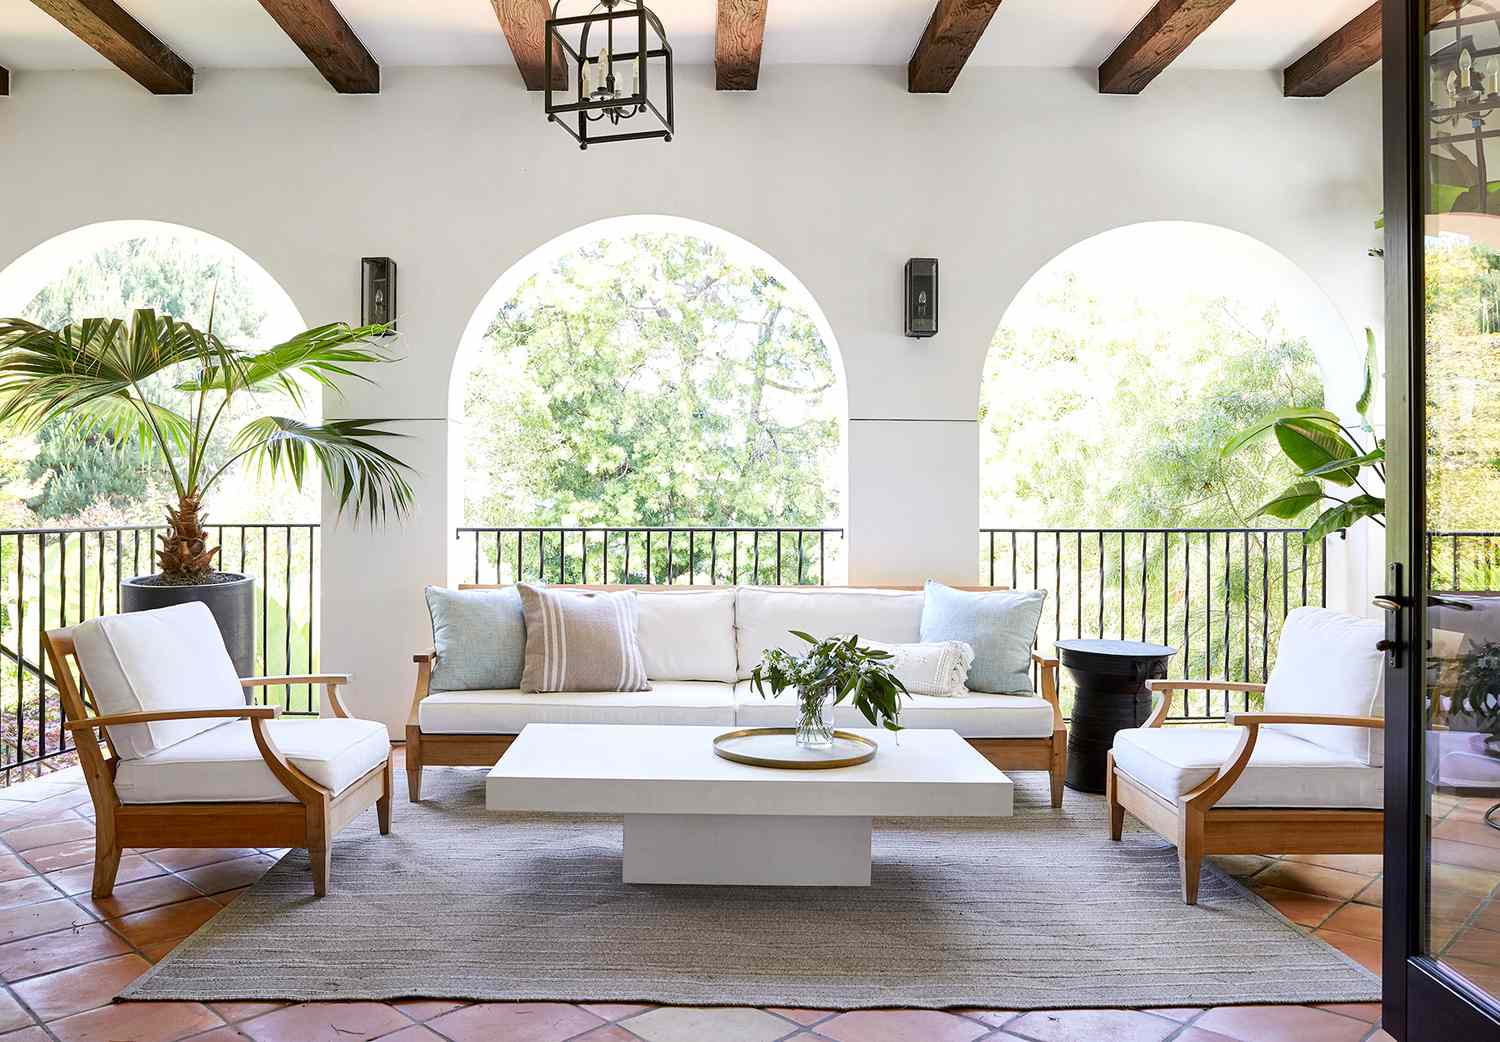 Outdoor Decor Tips: Creating a beautiful outdoor living space.